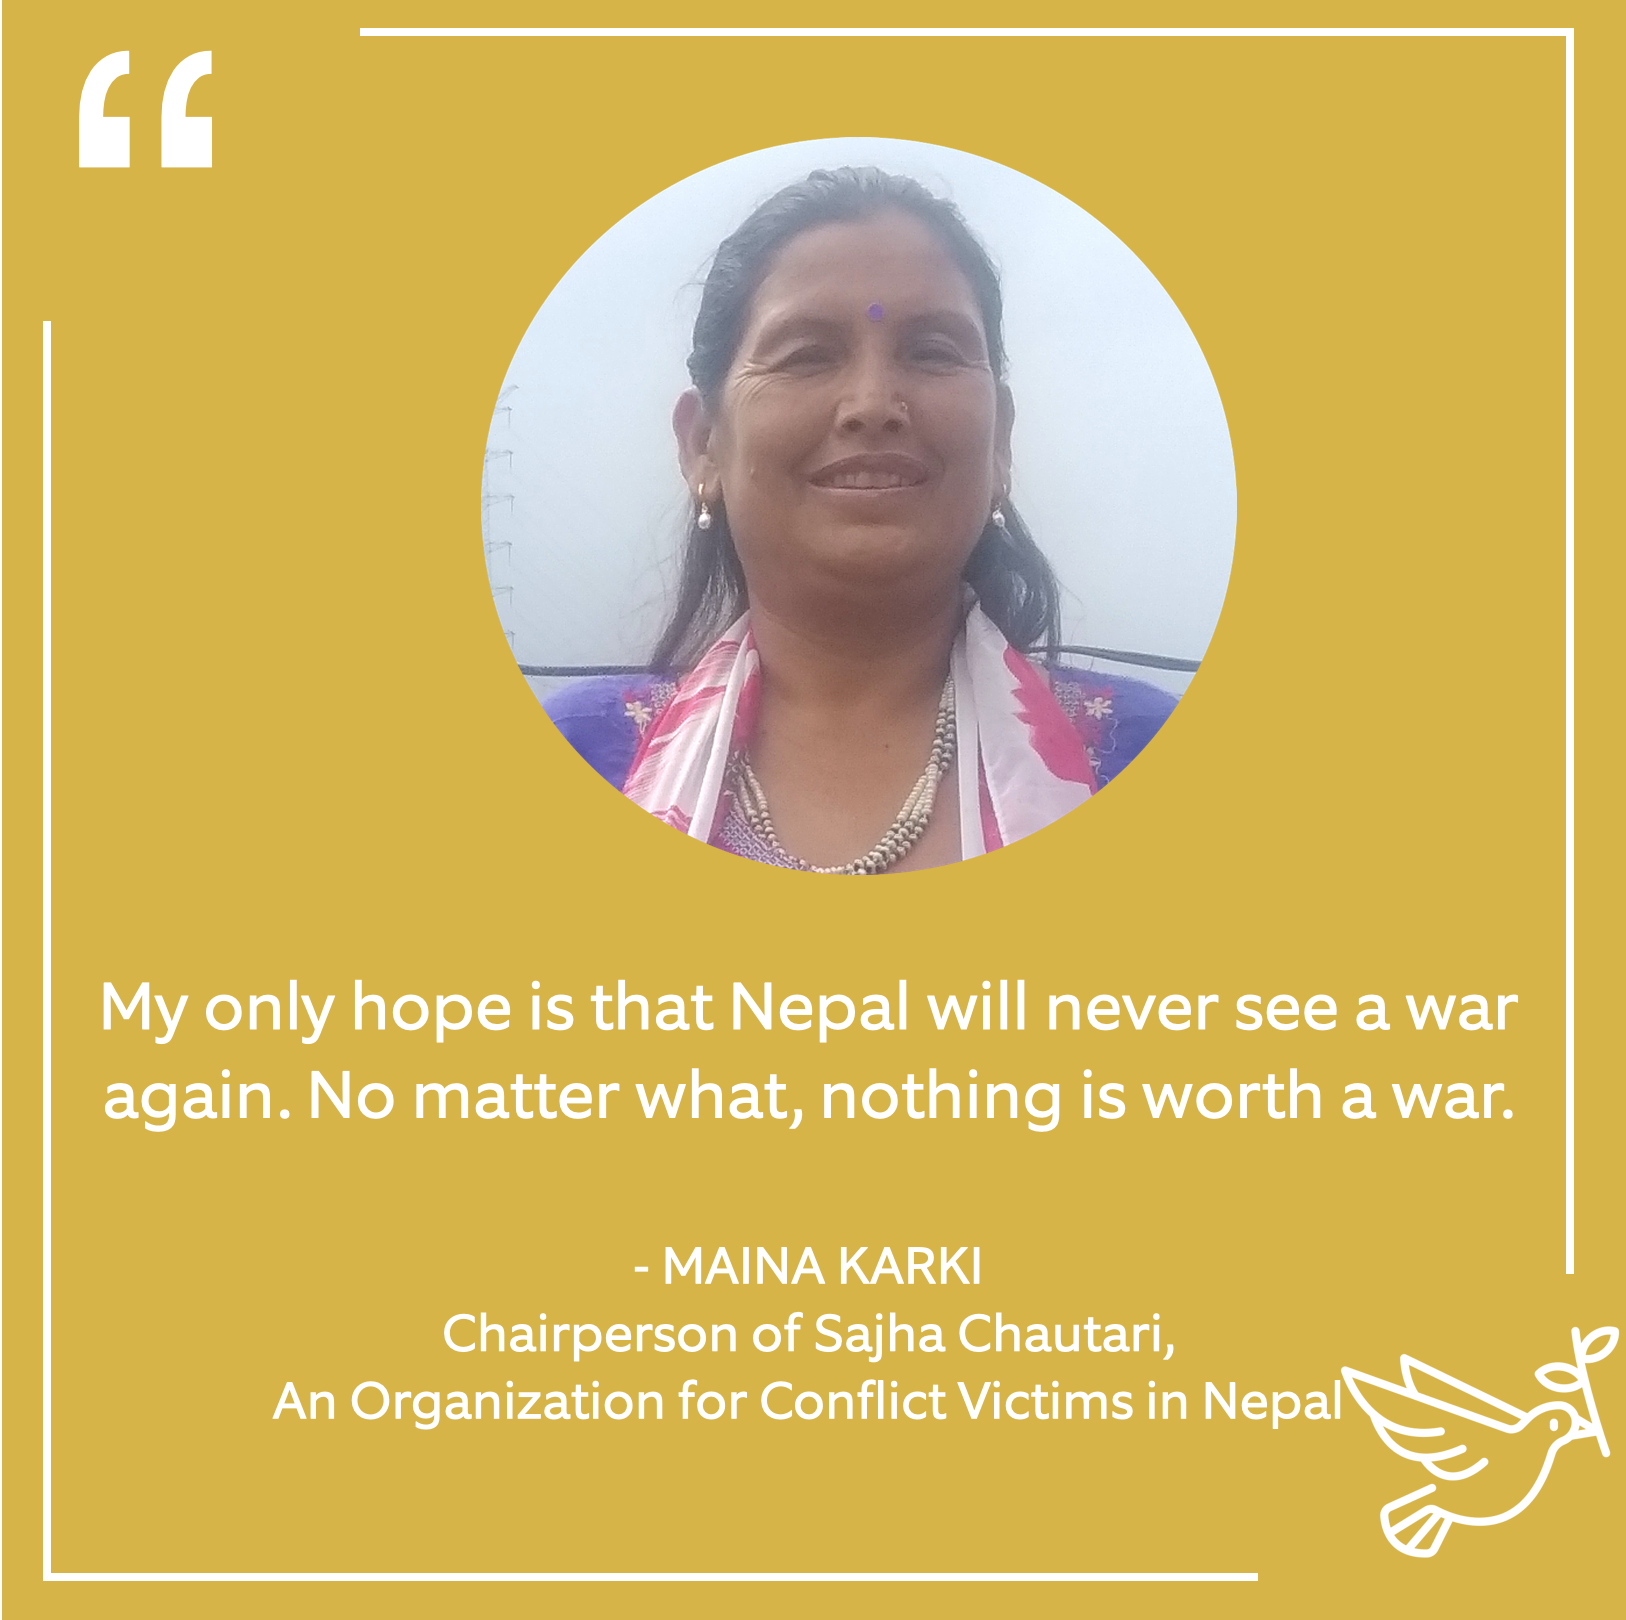 Maina Karki - Chairperson of Sajha Chautari, an Organization for conflict victims in Nepal.